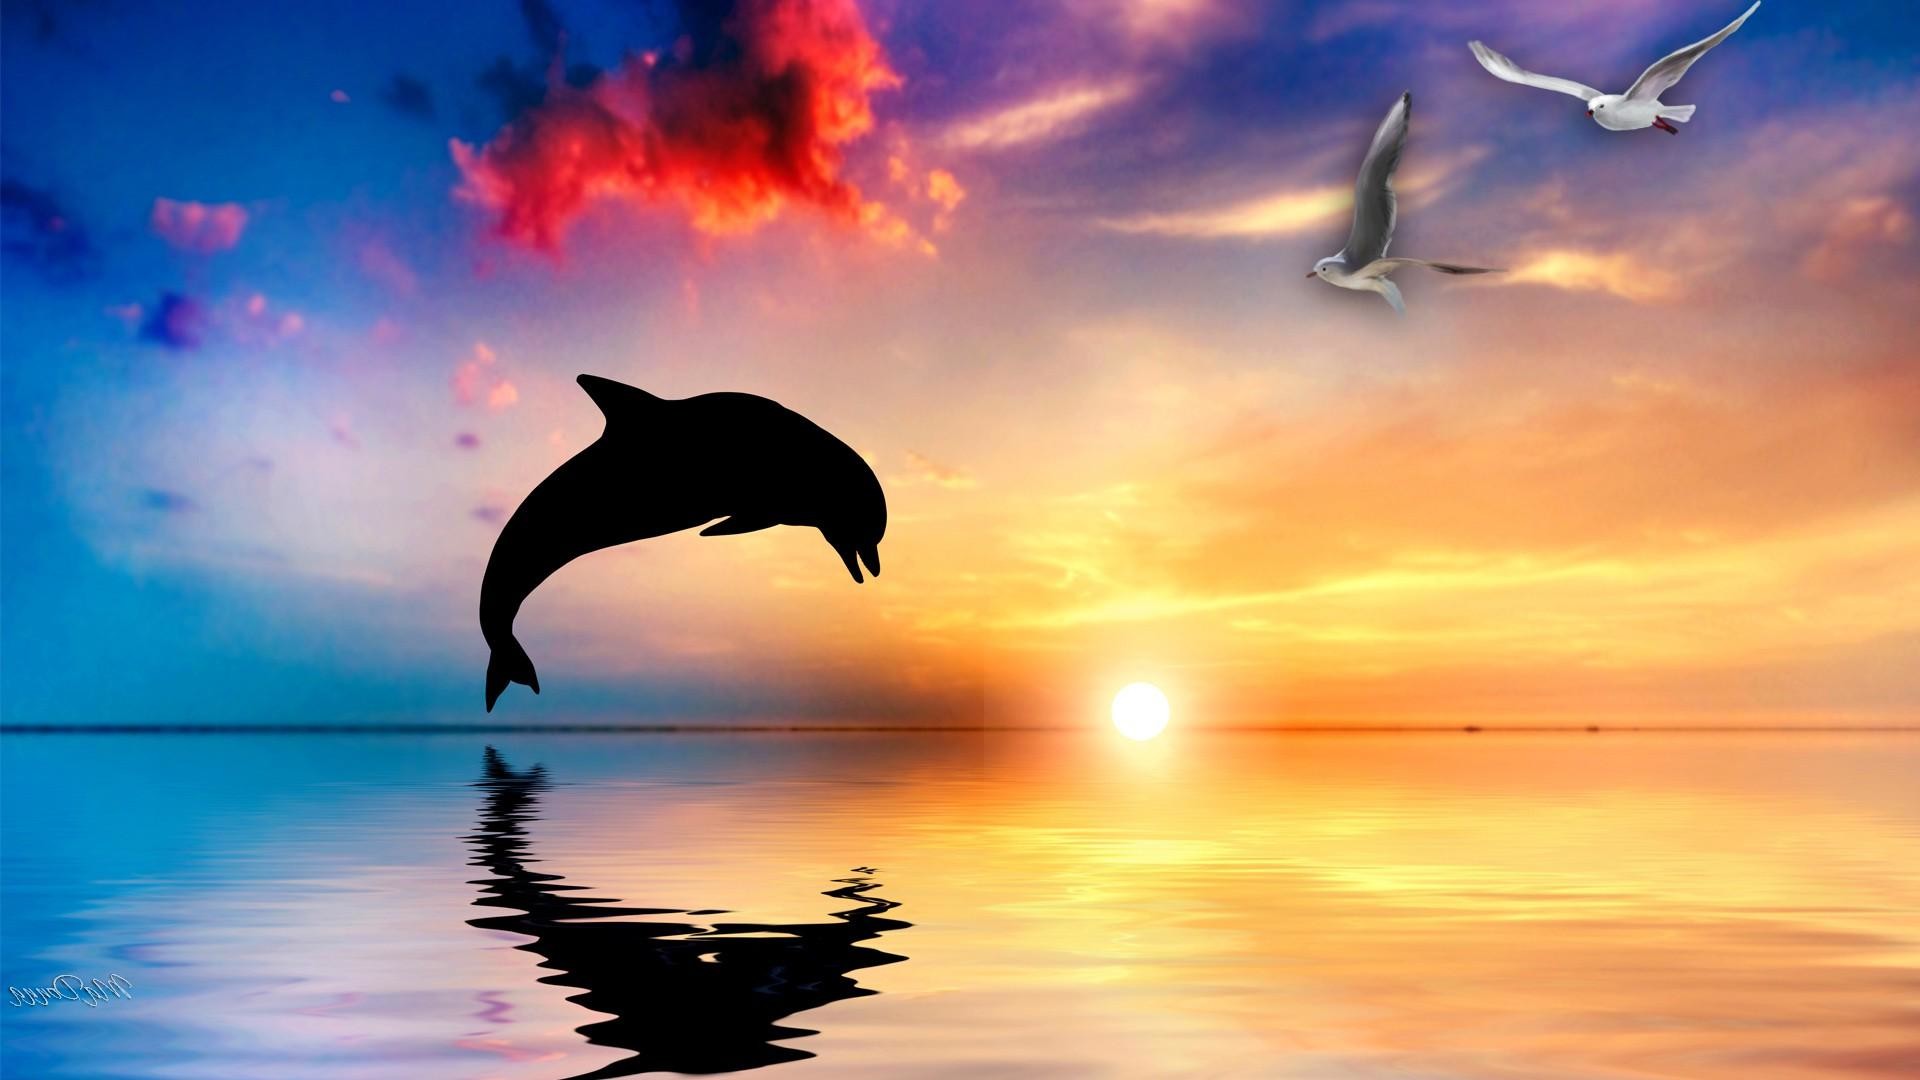 The highest quality Dolphins Backgrounds for you IPhone  Cool backgrounds   Dolphin images Dolphin art Pink dolphin wallpaper